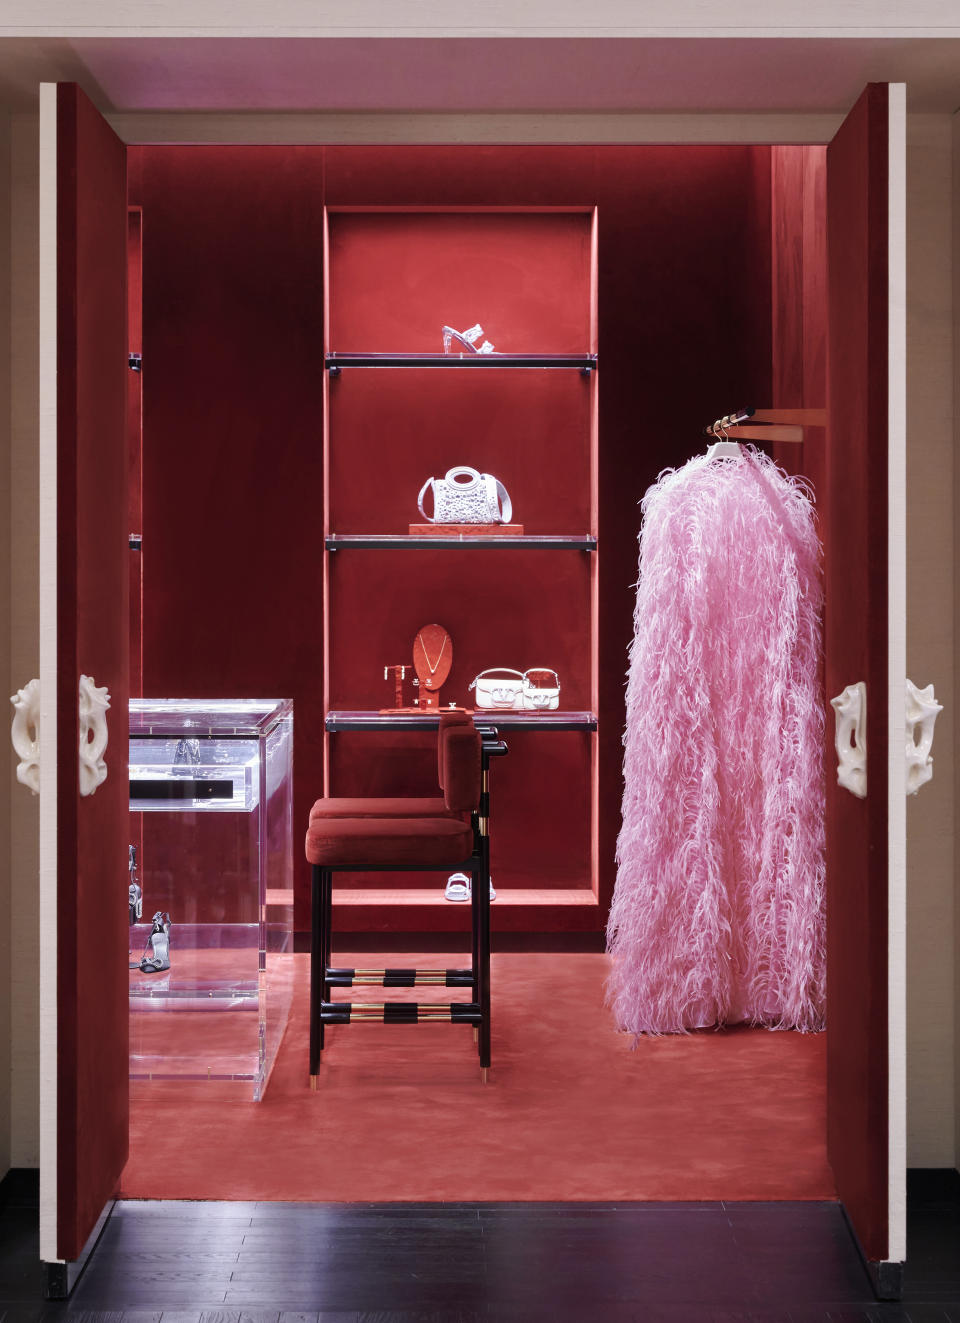 The red room at the Valentino store on Avenue Montaigne.